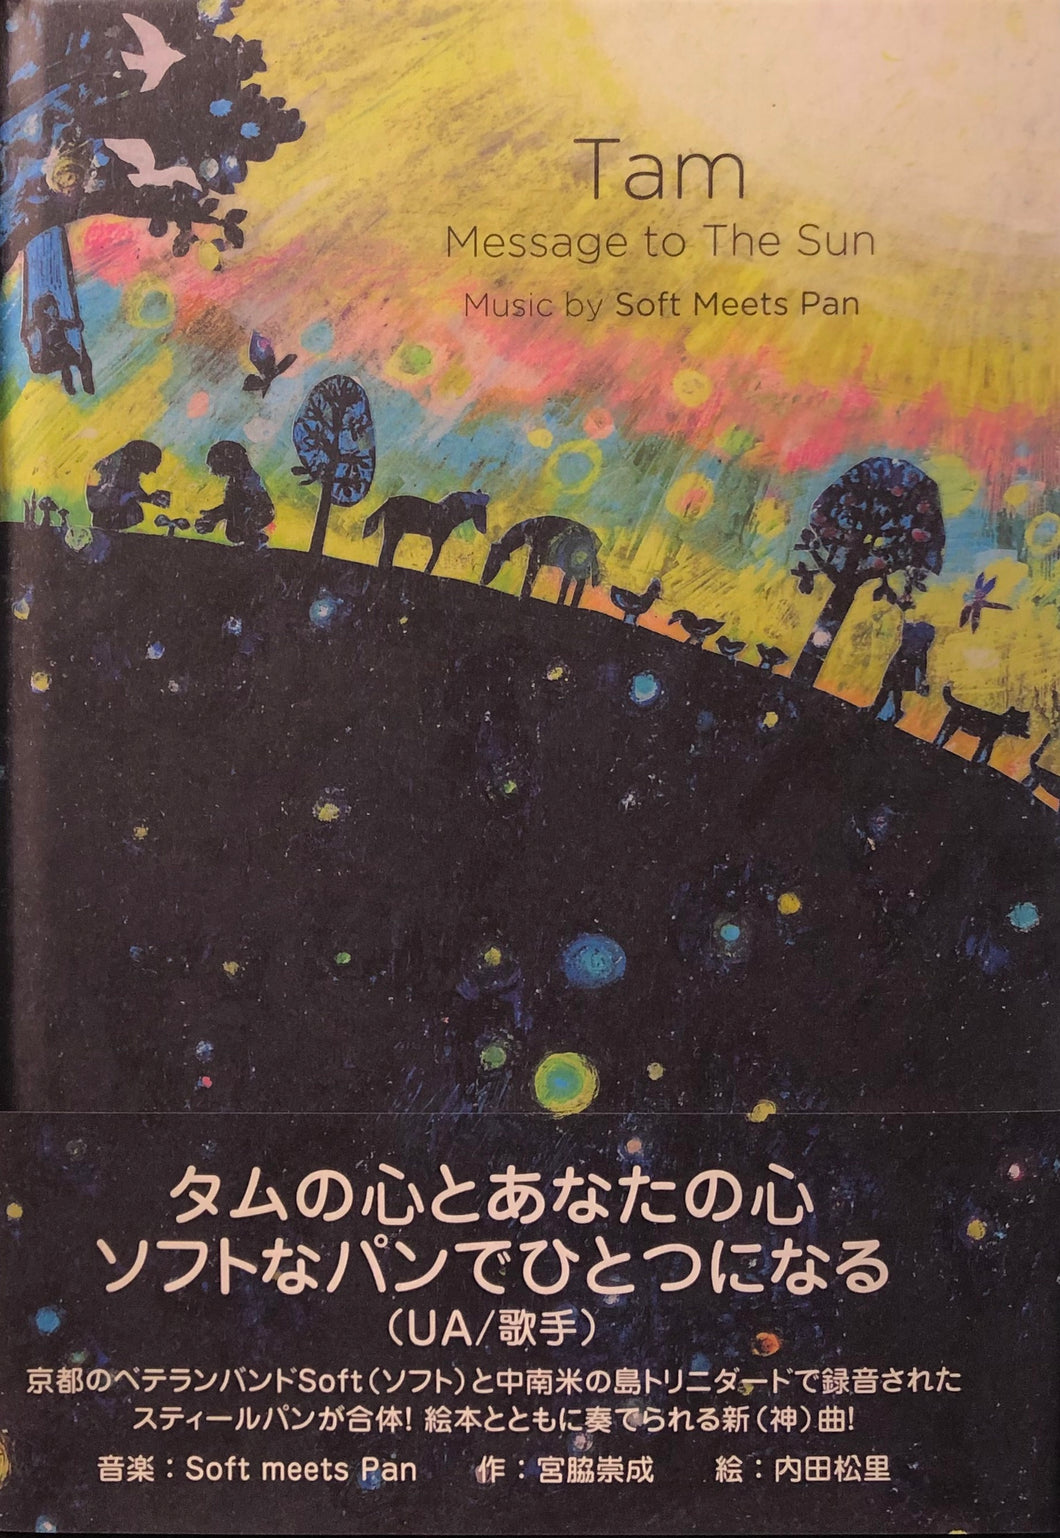 Soft Meets Pan  “Tam : Message to The Sun” Book + CD